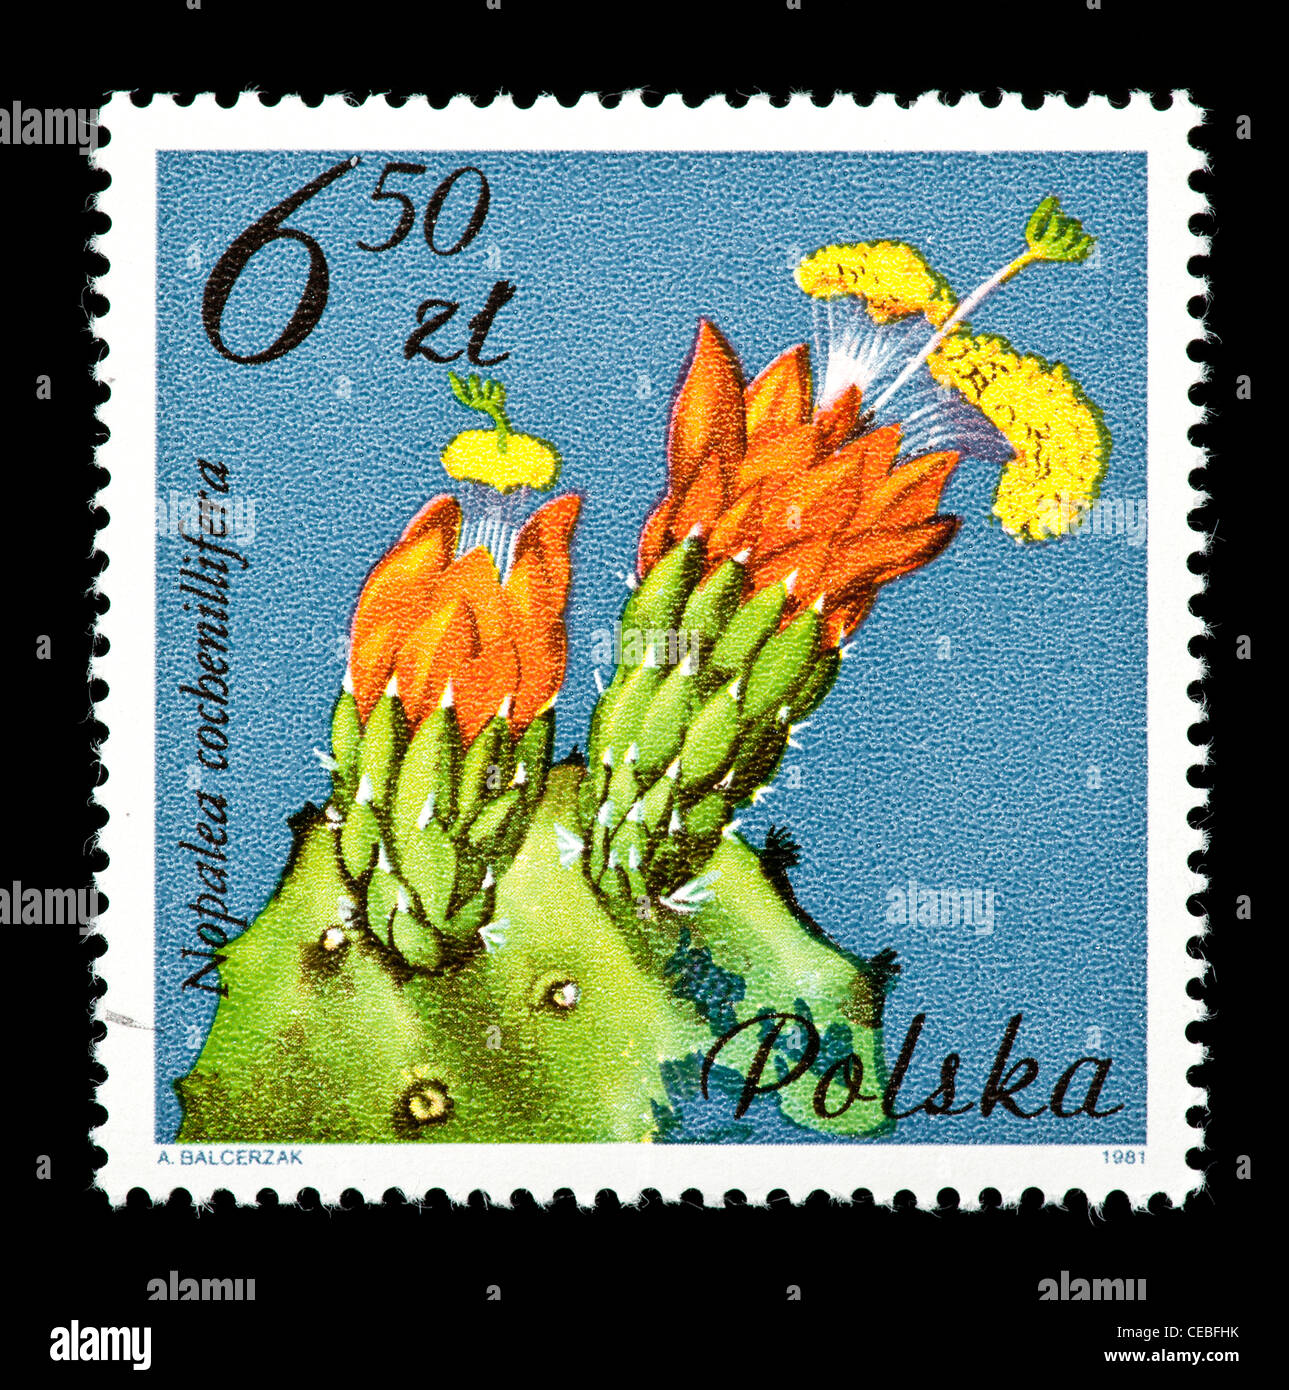 Postage stamp from Poland depicting a prickly pear cactus (Nopalea cochenillifera) Stock Photo